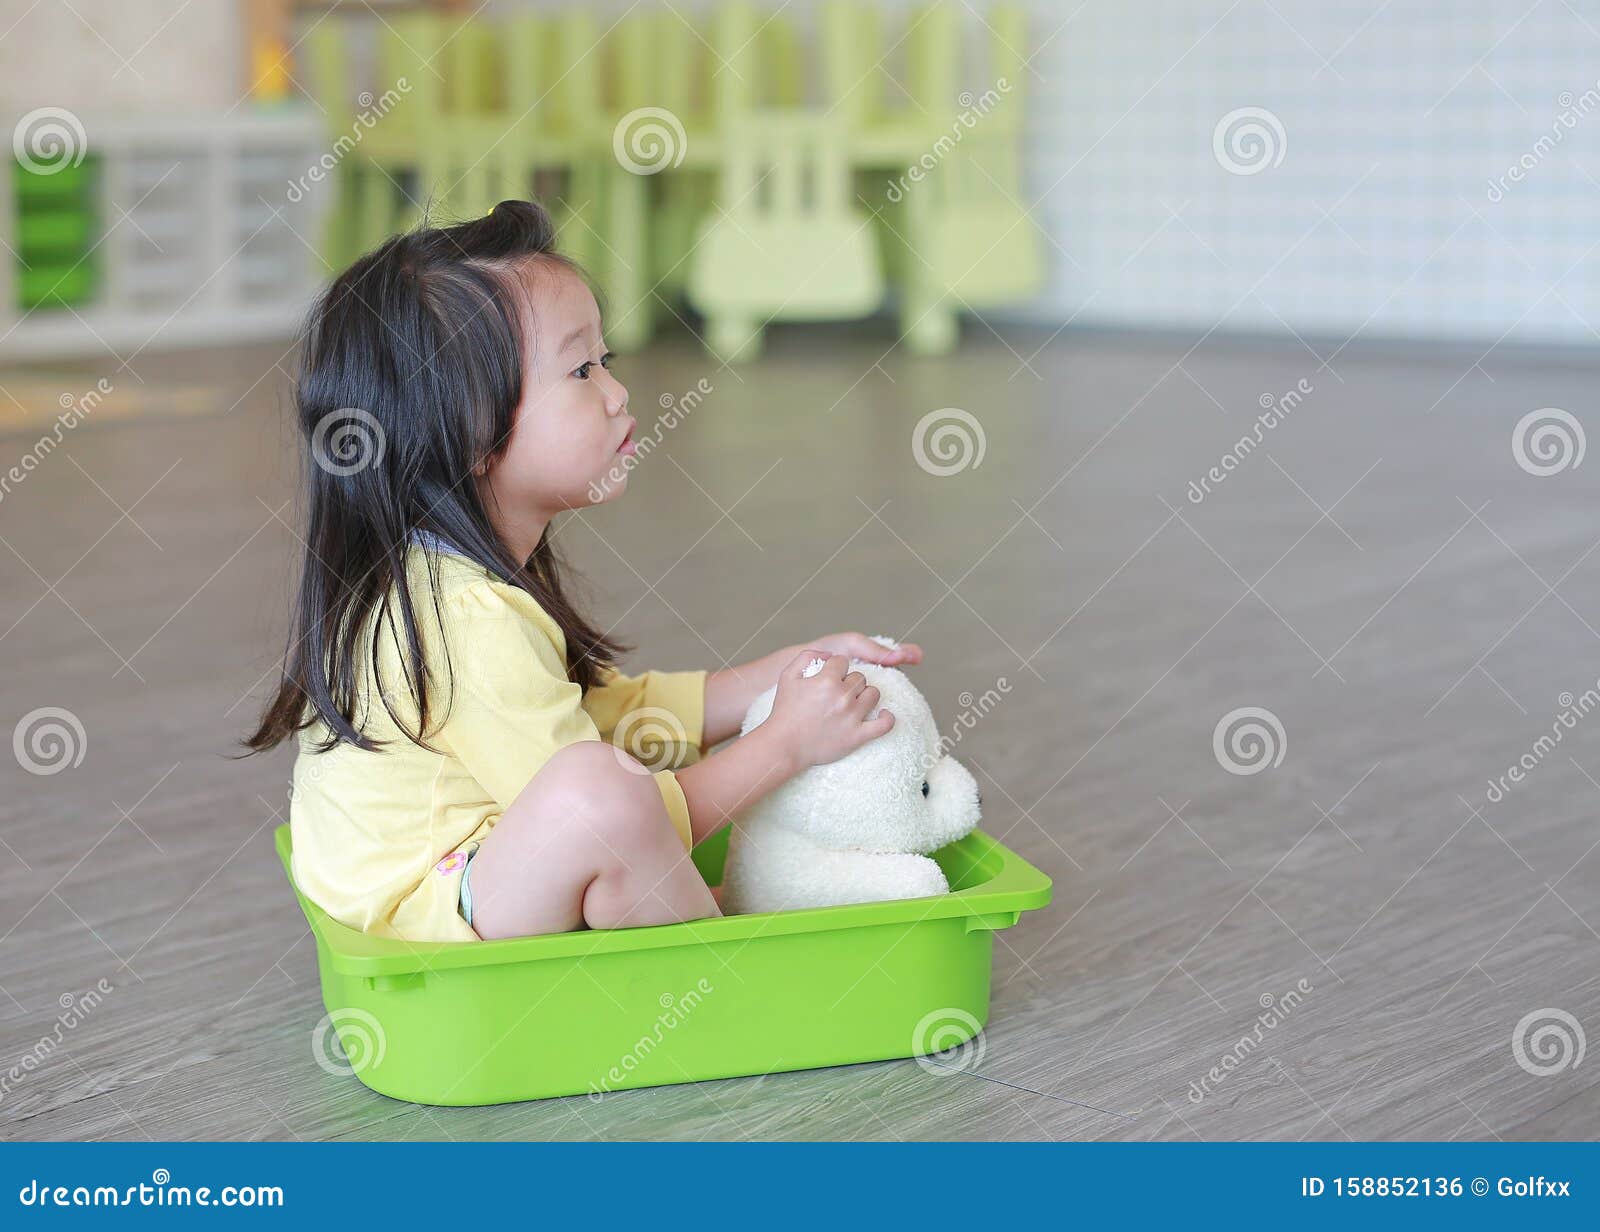 Child Sitting in Plastic Tray Playing at Playroom Stock Photo - Image ...